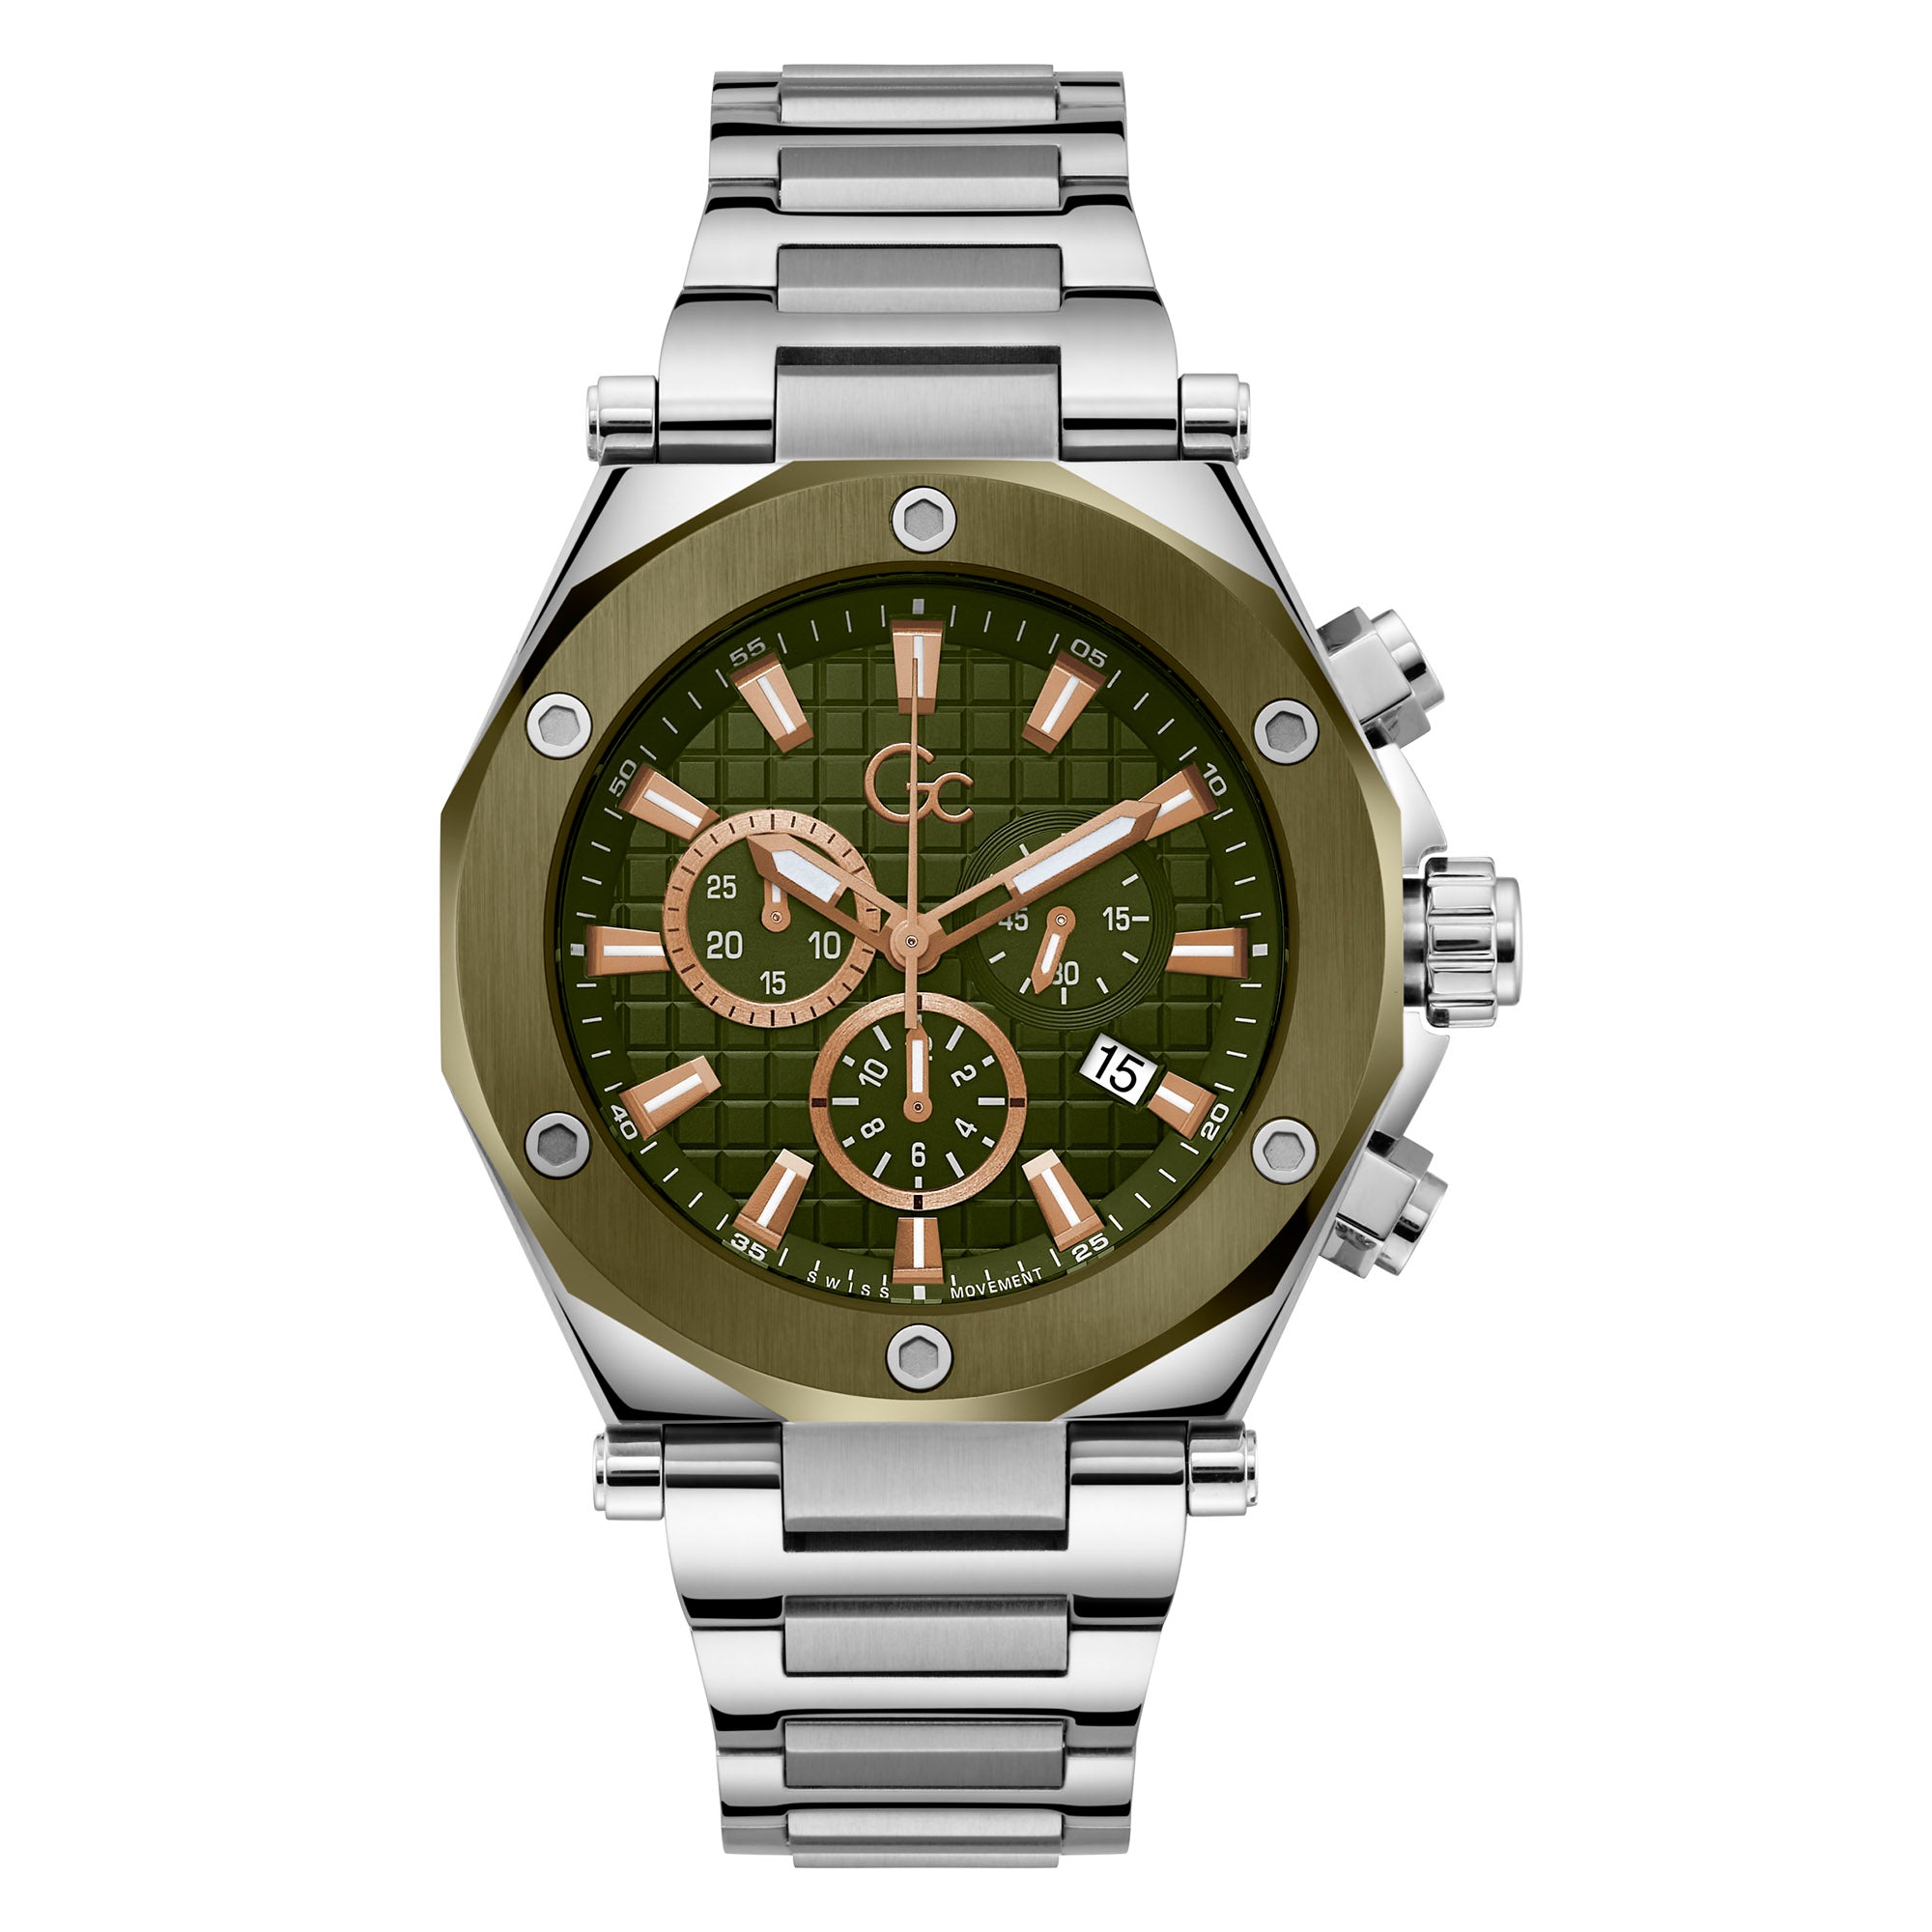 Gc CableSport Chrono Ceramic - Y89002G2MF | GUESS Watches US